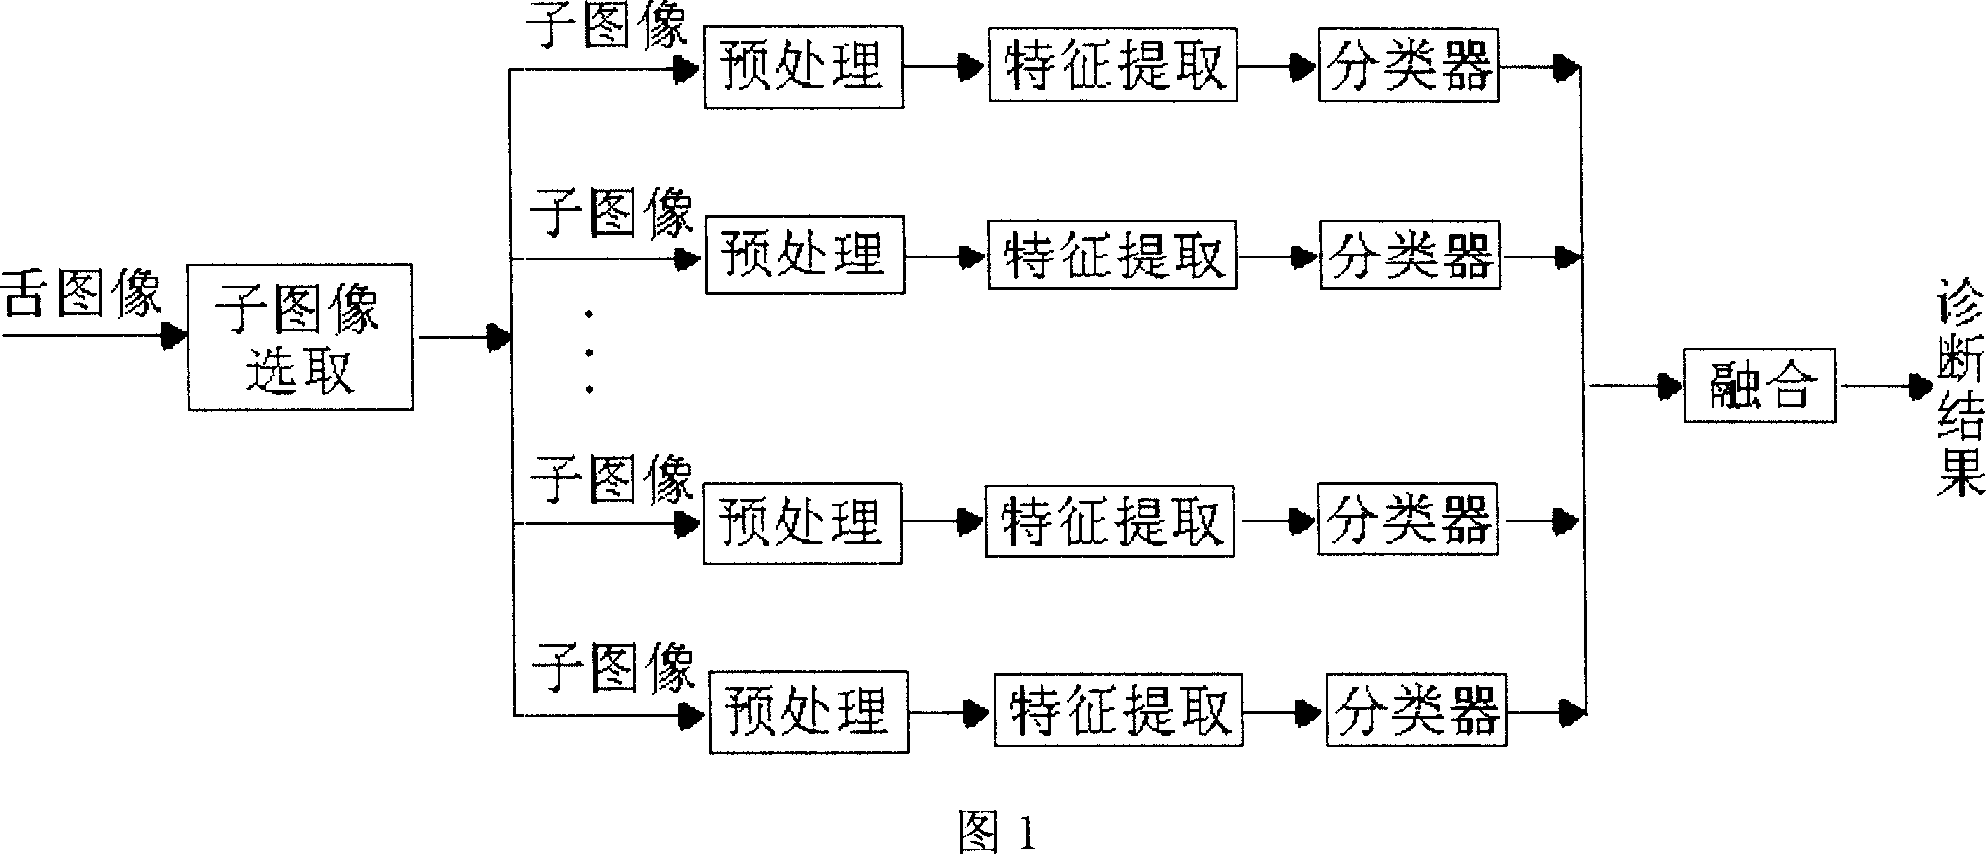 Computerized Chinese medicine Wei-Qi-Ying-Xue syndrome classification method based on tongue picture